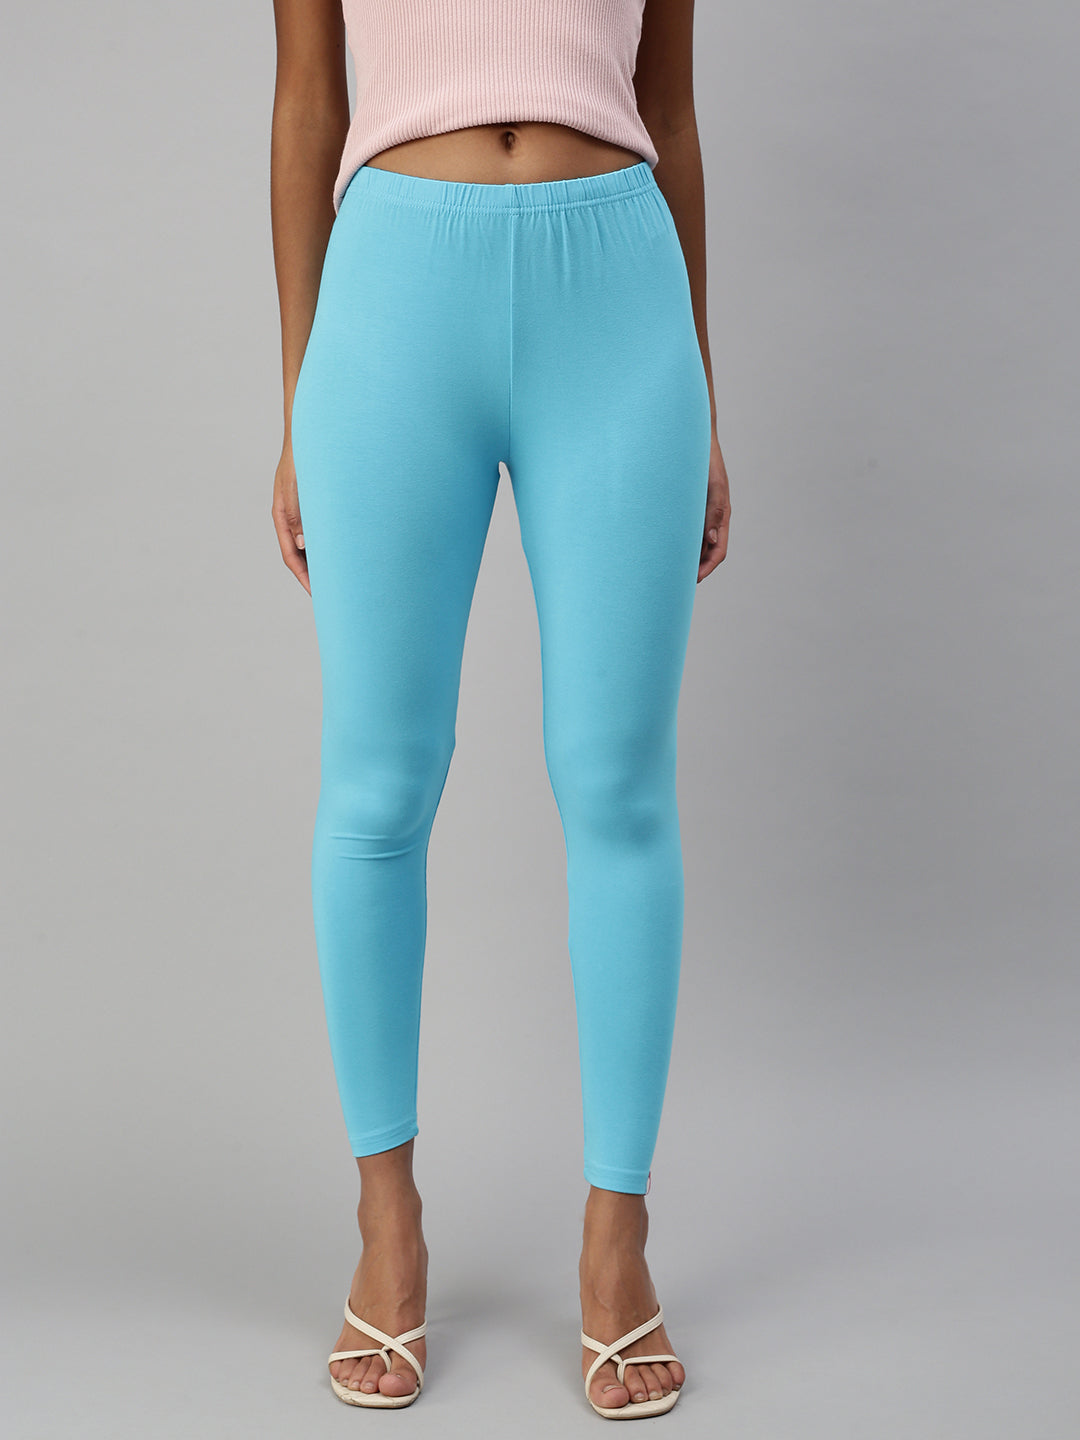 Balance Collection Easy Contender Lux Ankle Legging at EverydayYoga.com -  Free Shipping